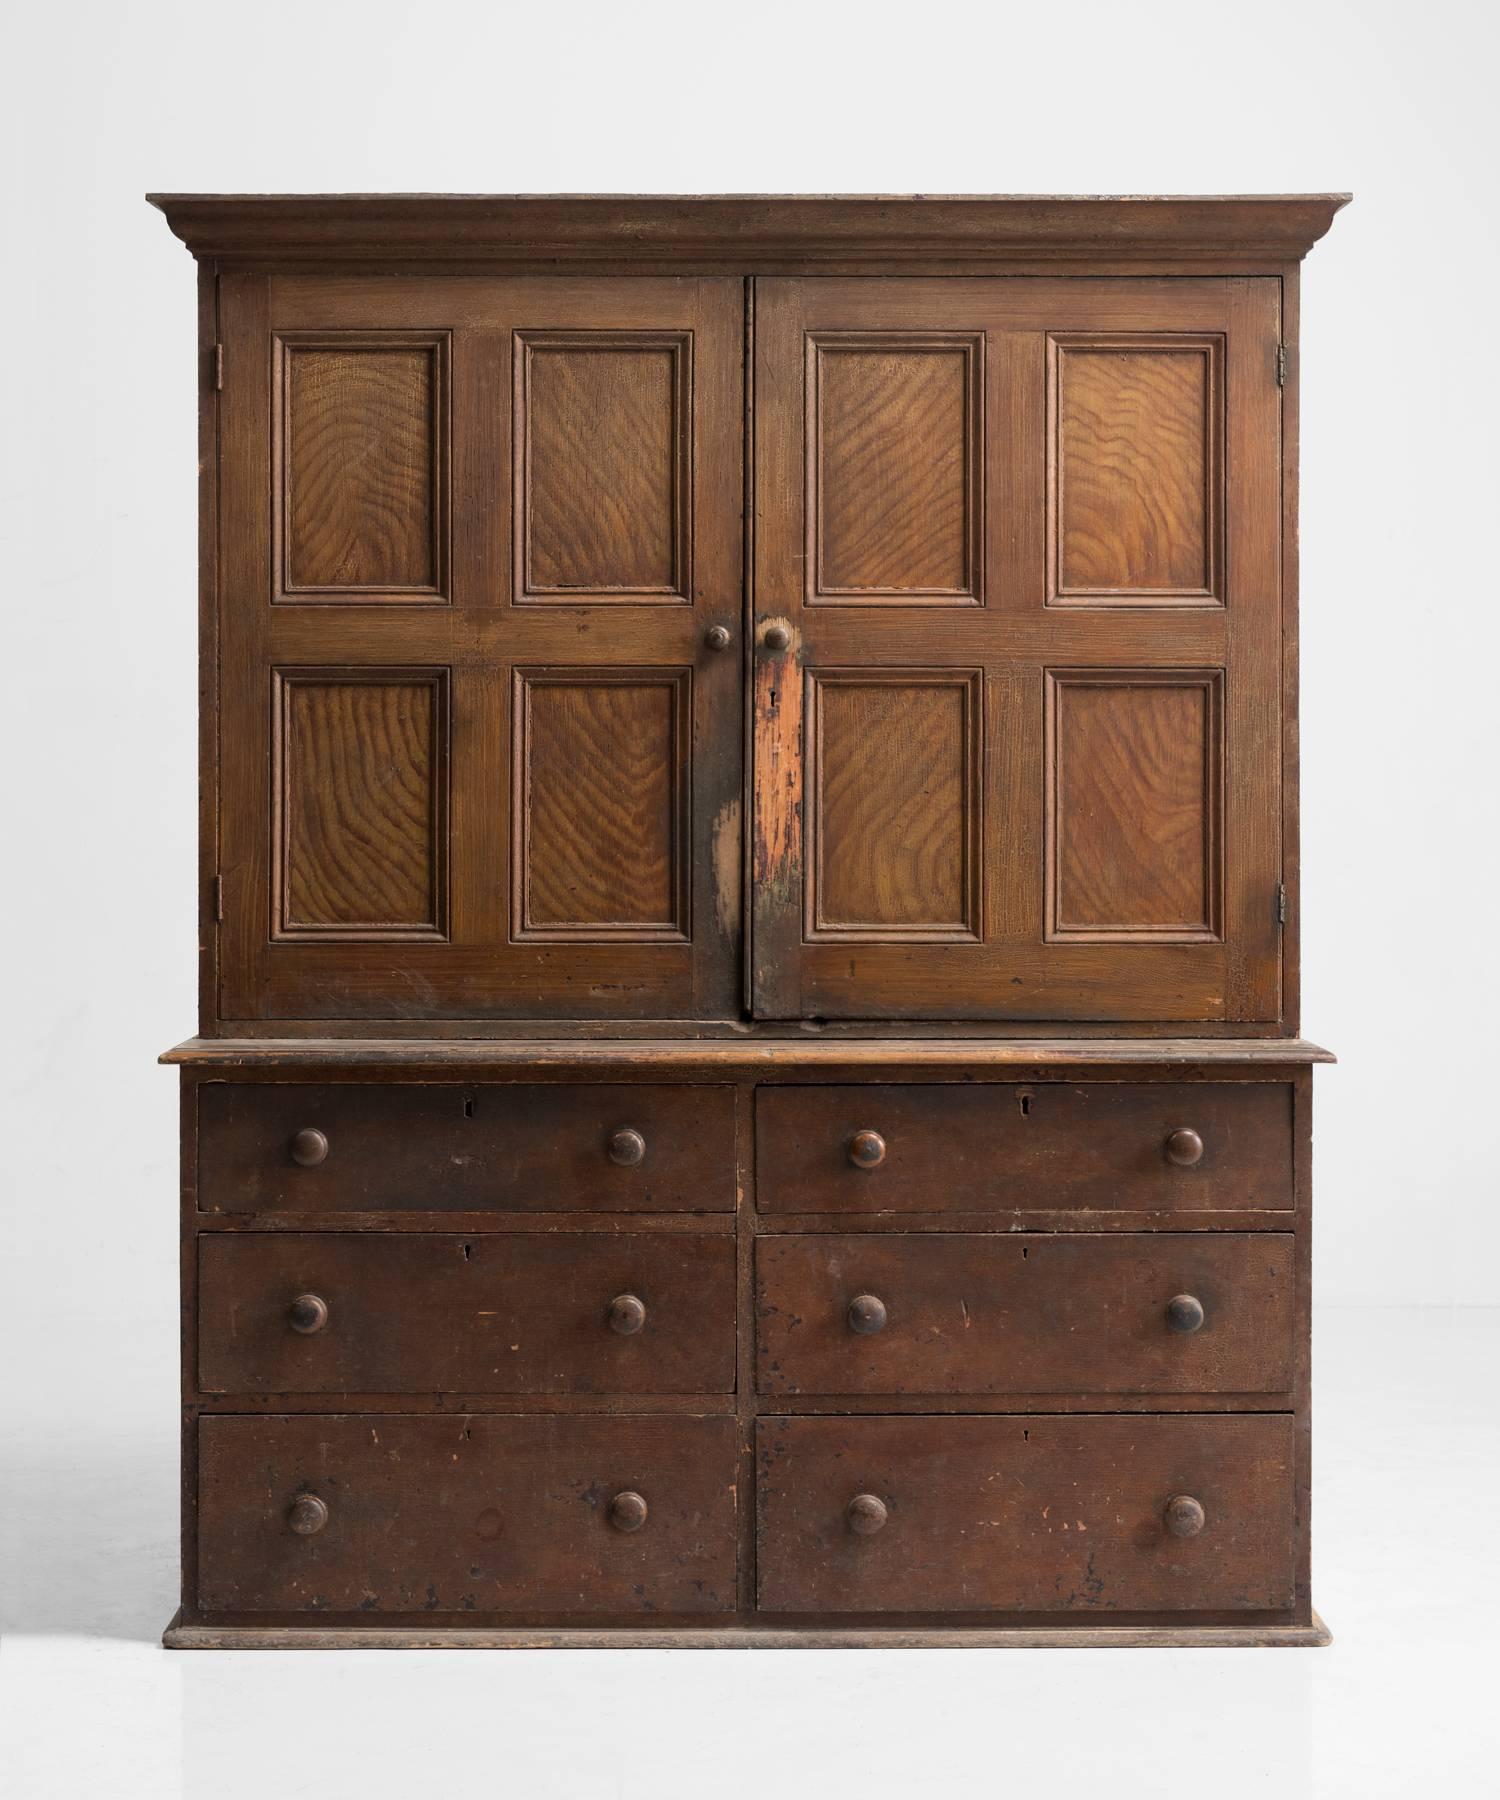 Pine housekeepers cupboard, made in England, circa 1850.

Pull out drawers on base with paneled doors and storage.